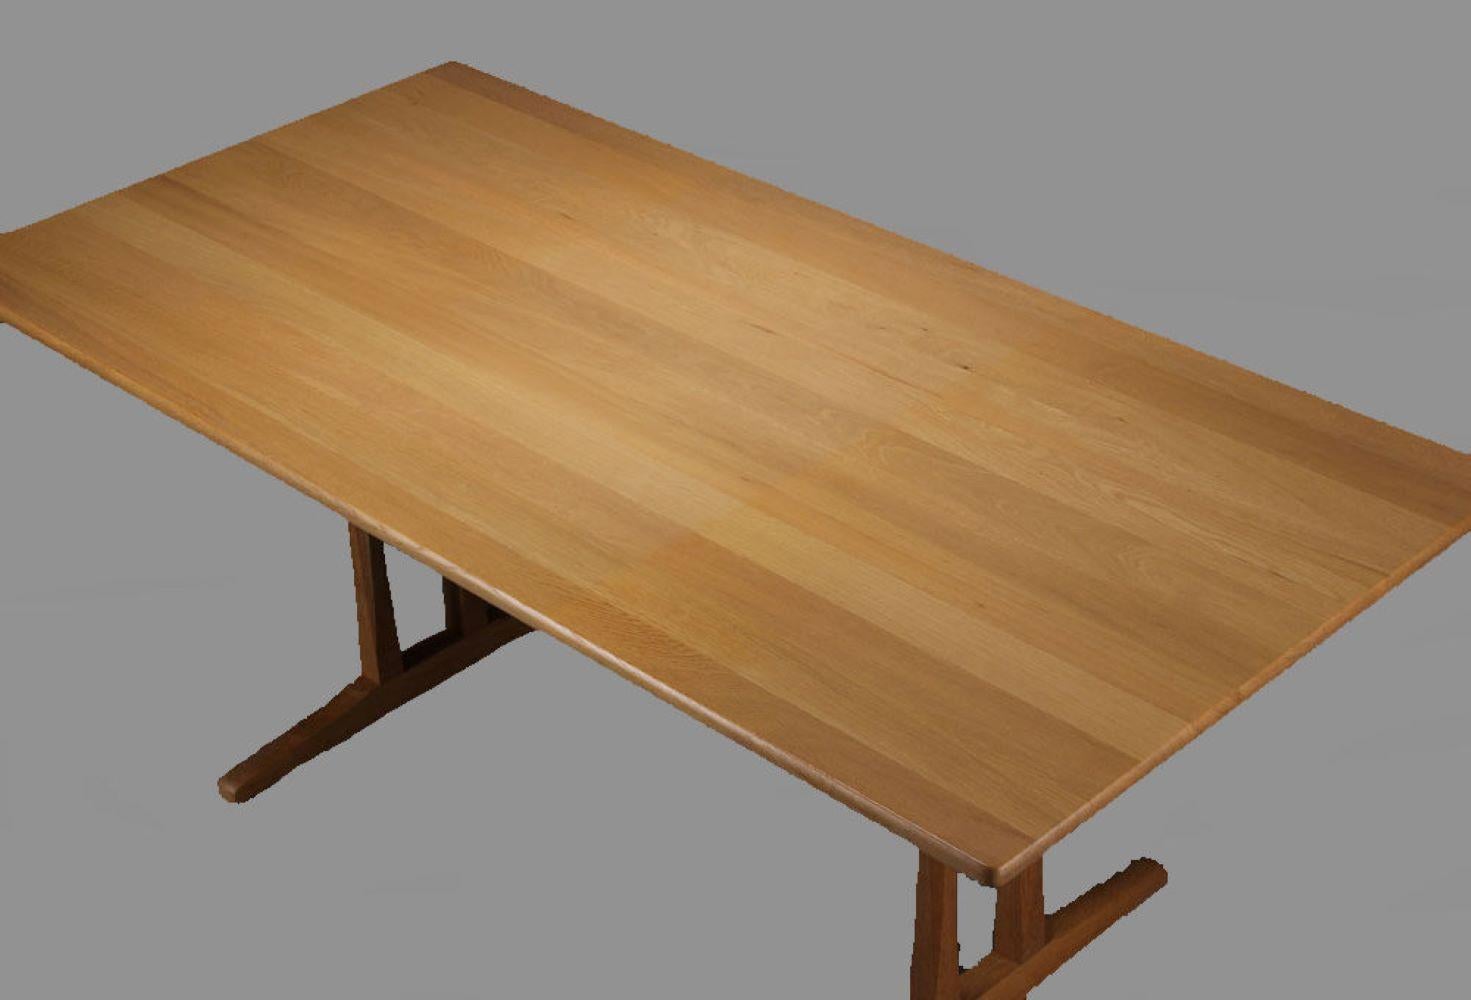 1960s Borge Mogensen Fully Restored Shaker Dining Table in Oak by FDB Mobler

The 